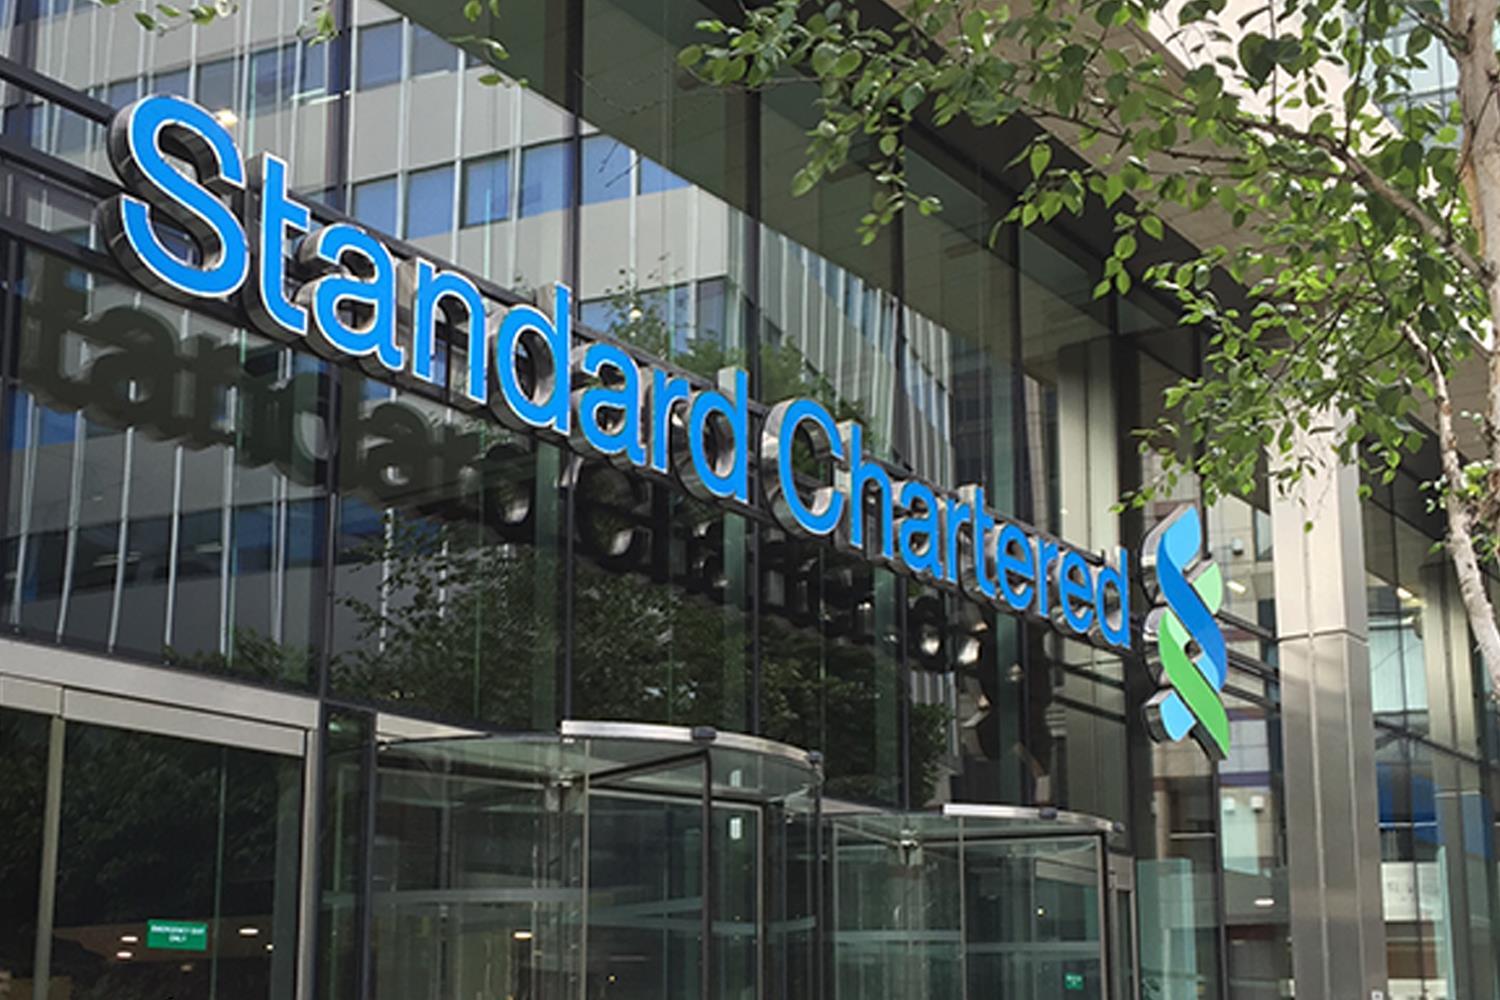 standard-chartered-bank-to-pay-1-1b-for-sanctions-violations-article-compliance-week